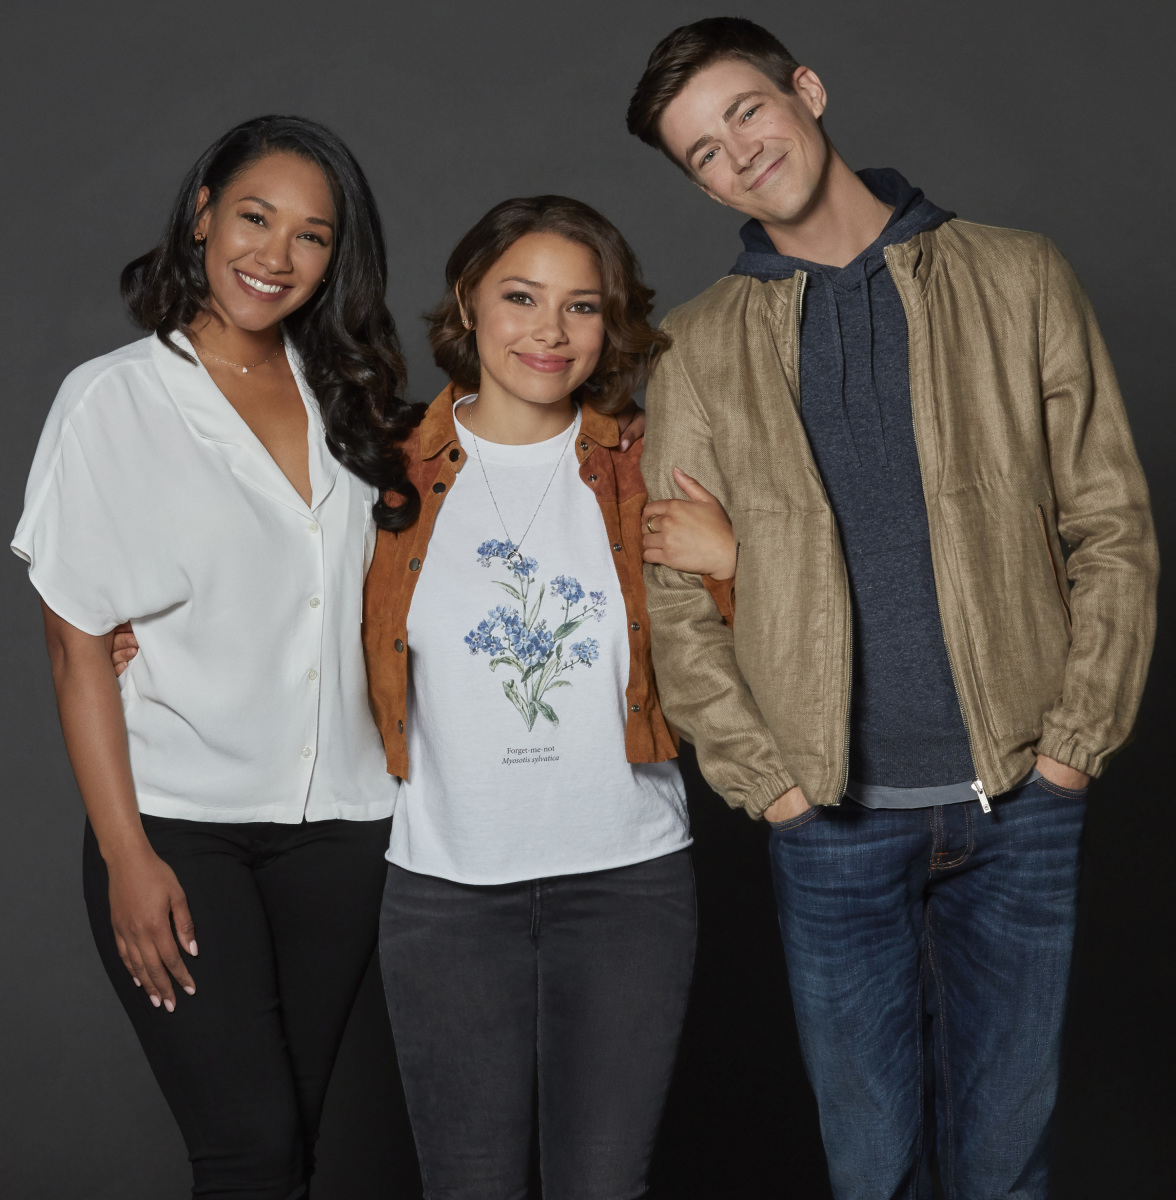 The Flash’s Candice Patton, Jessica Parker Kennedy and Grant Gustin 